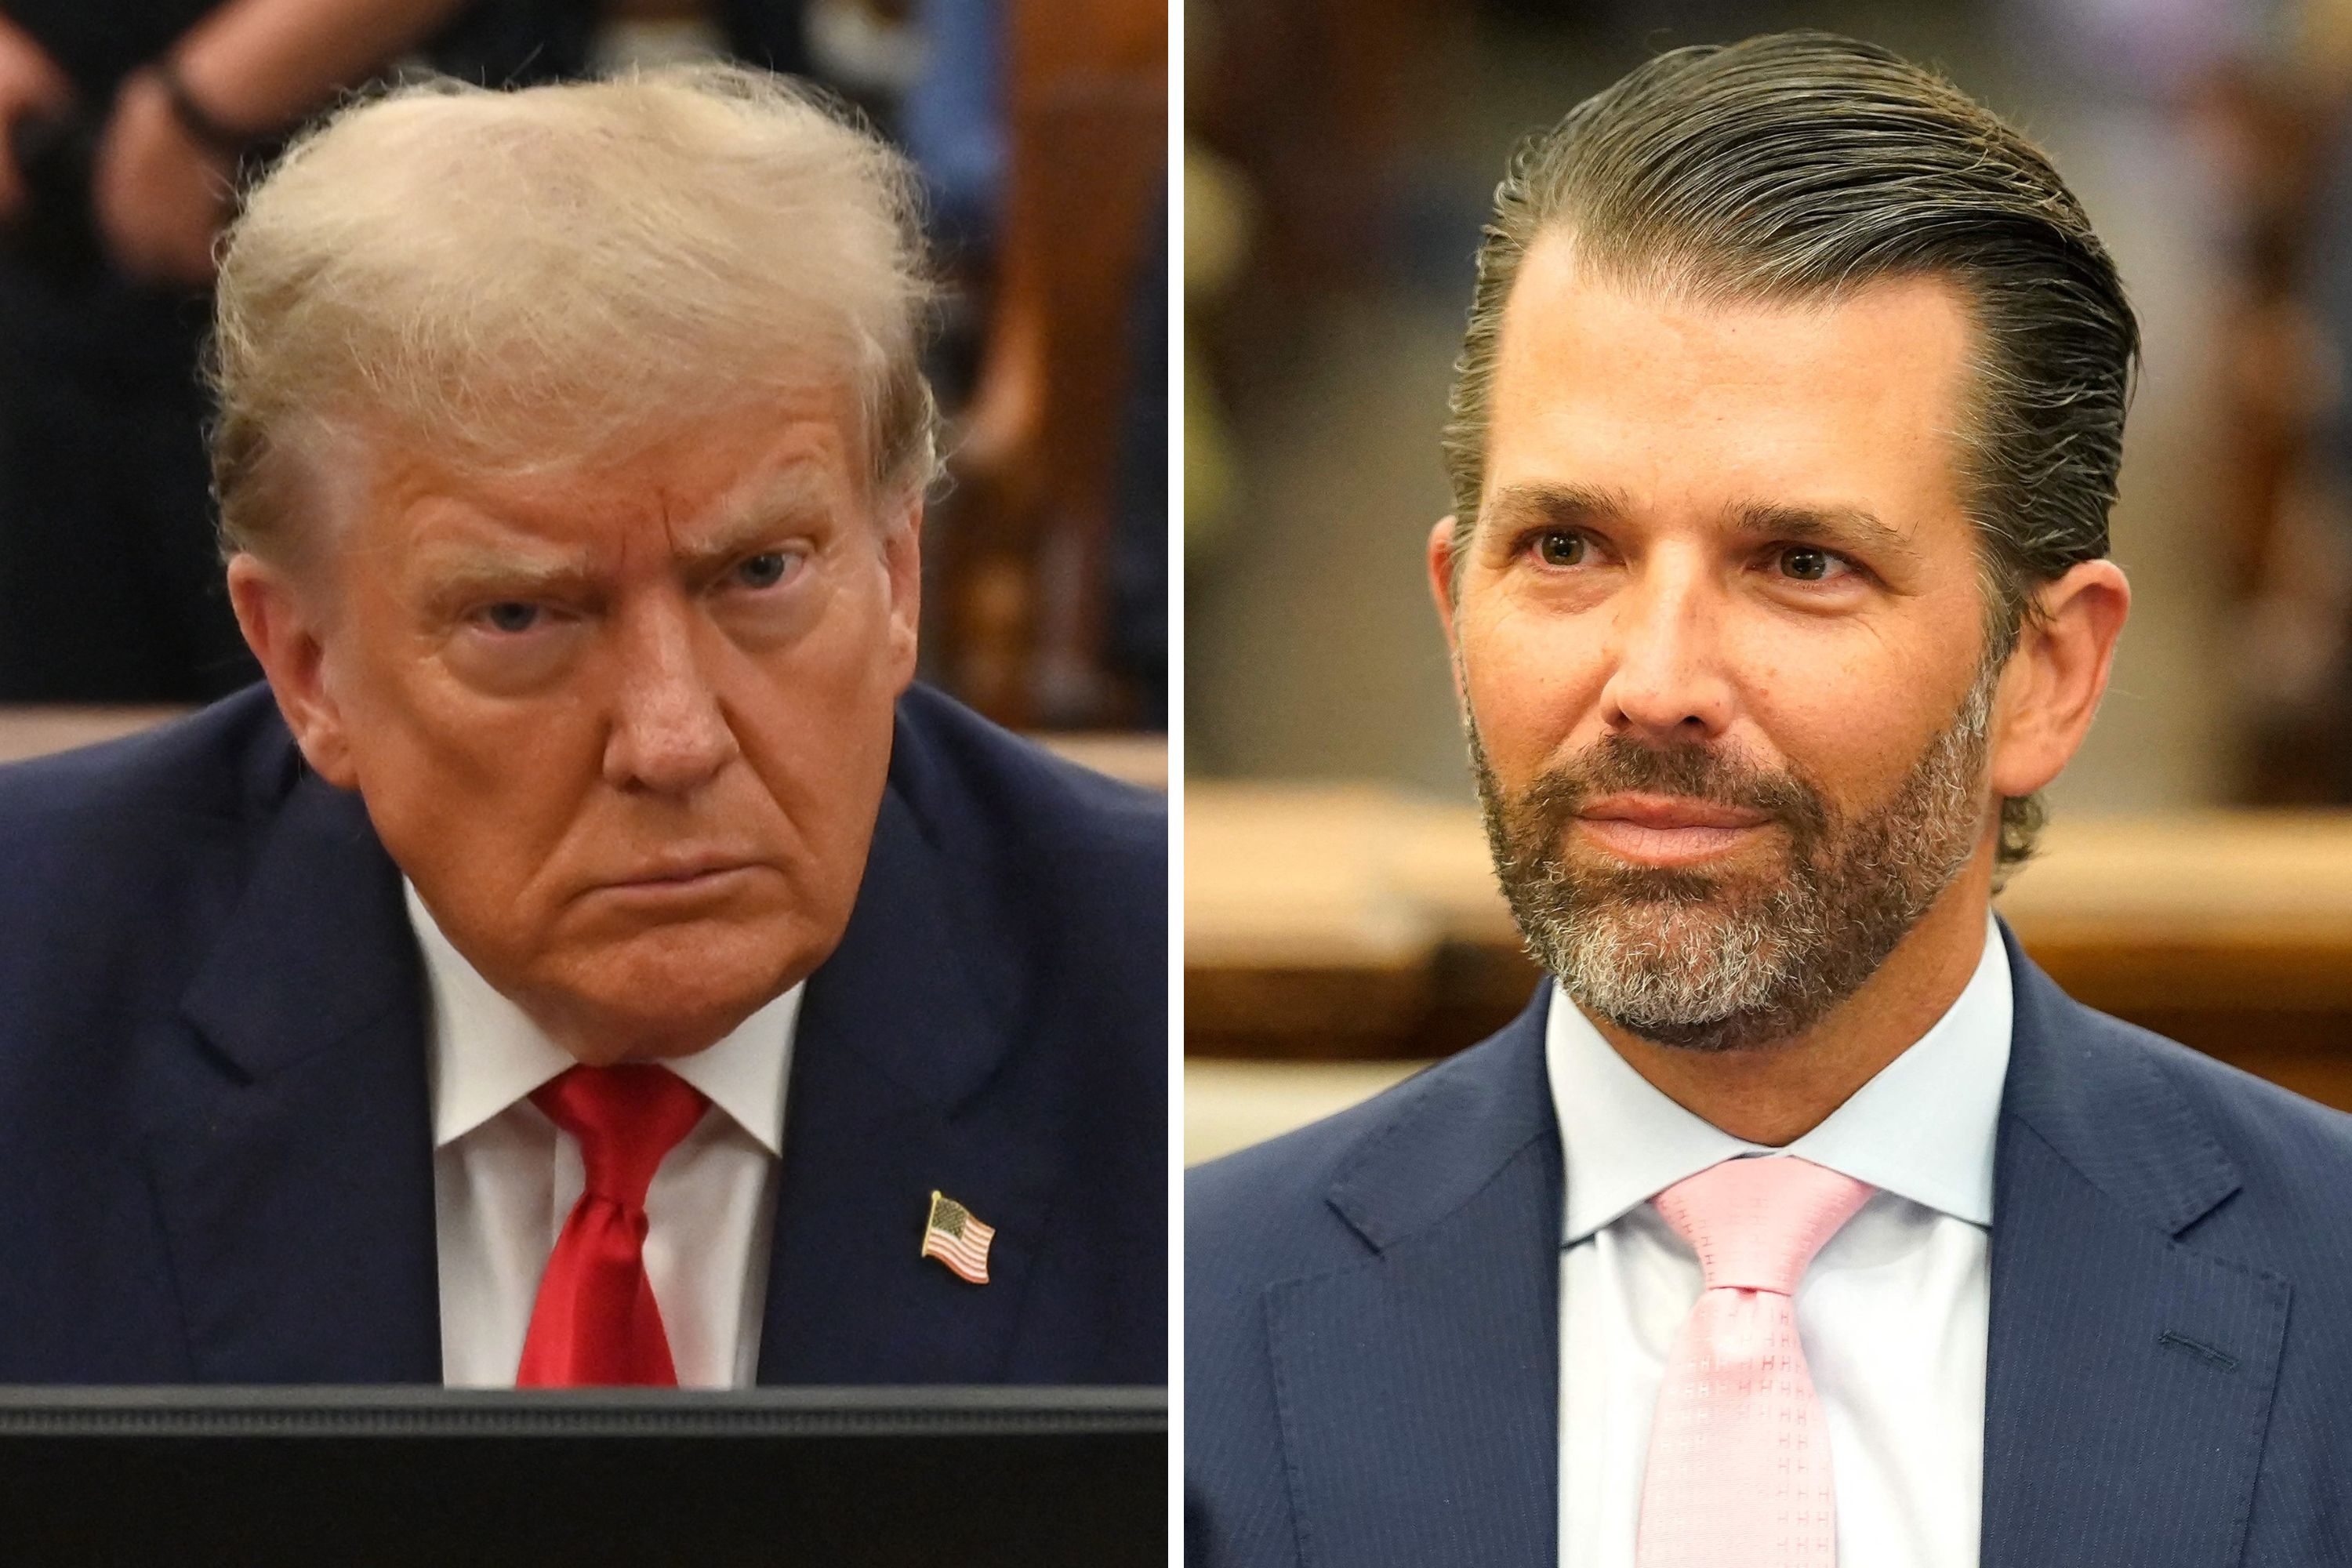 Donald Trump Jr. Behavior in Court Was Wildly Different From His Father's